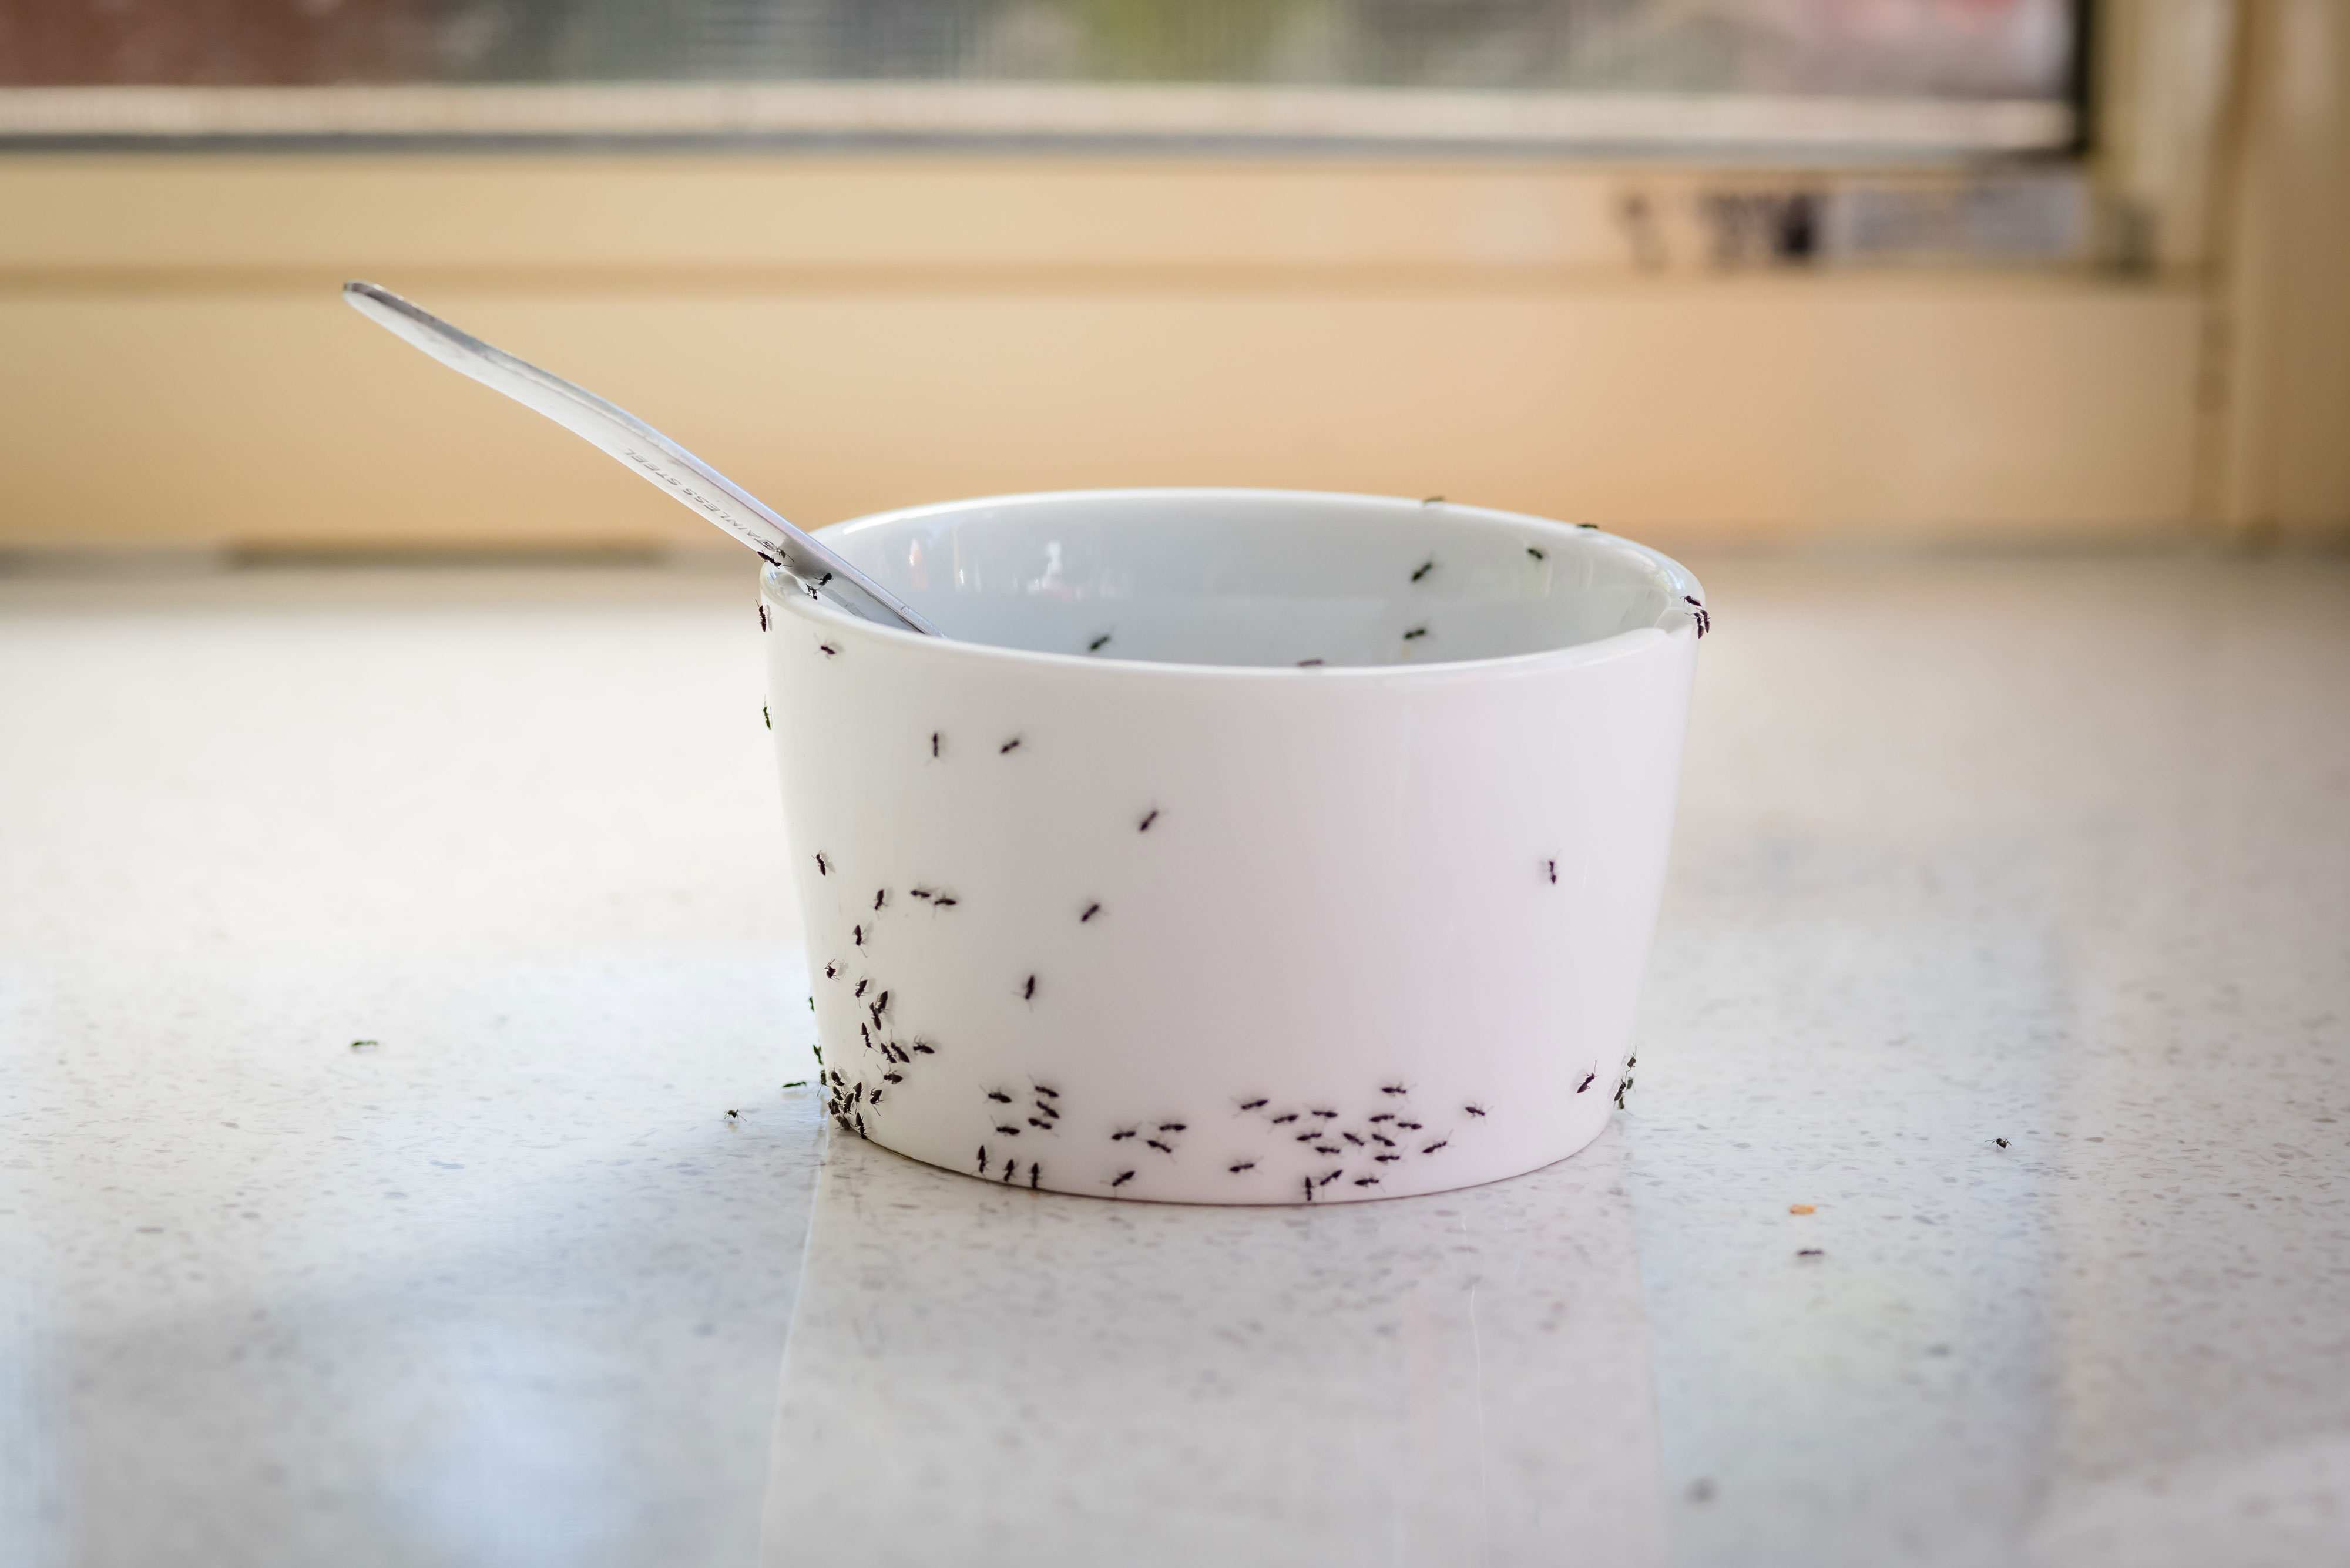 Ants on a cup.